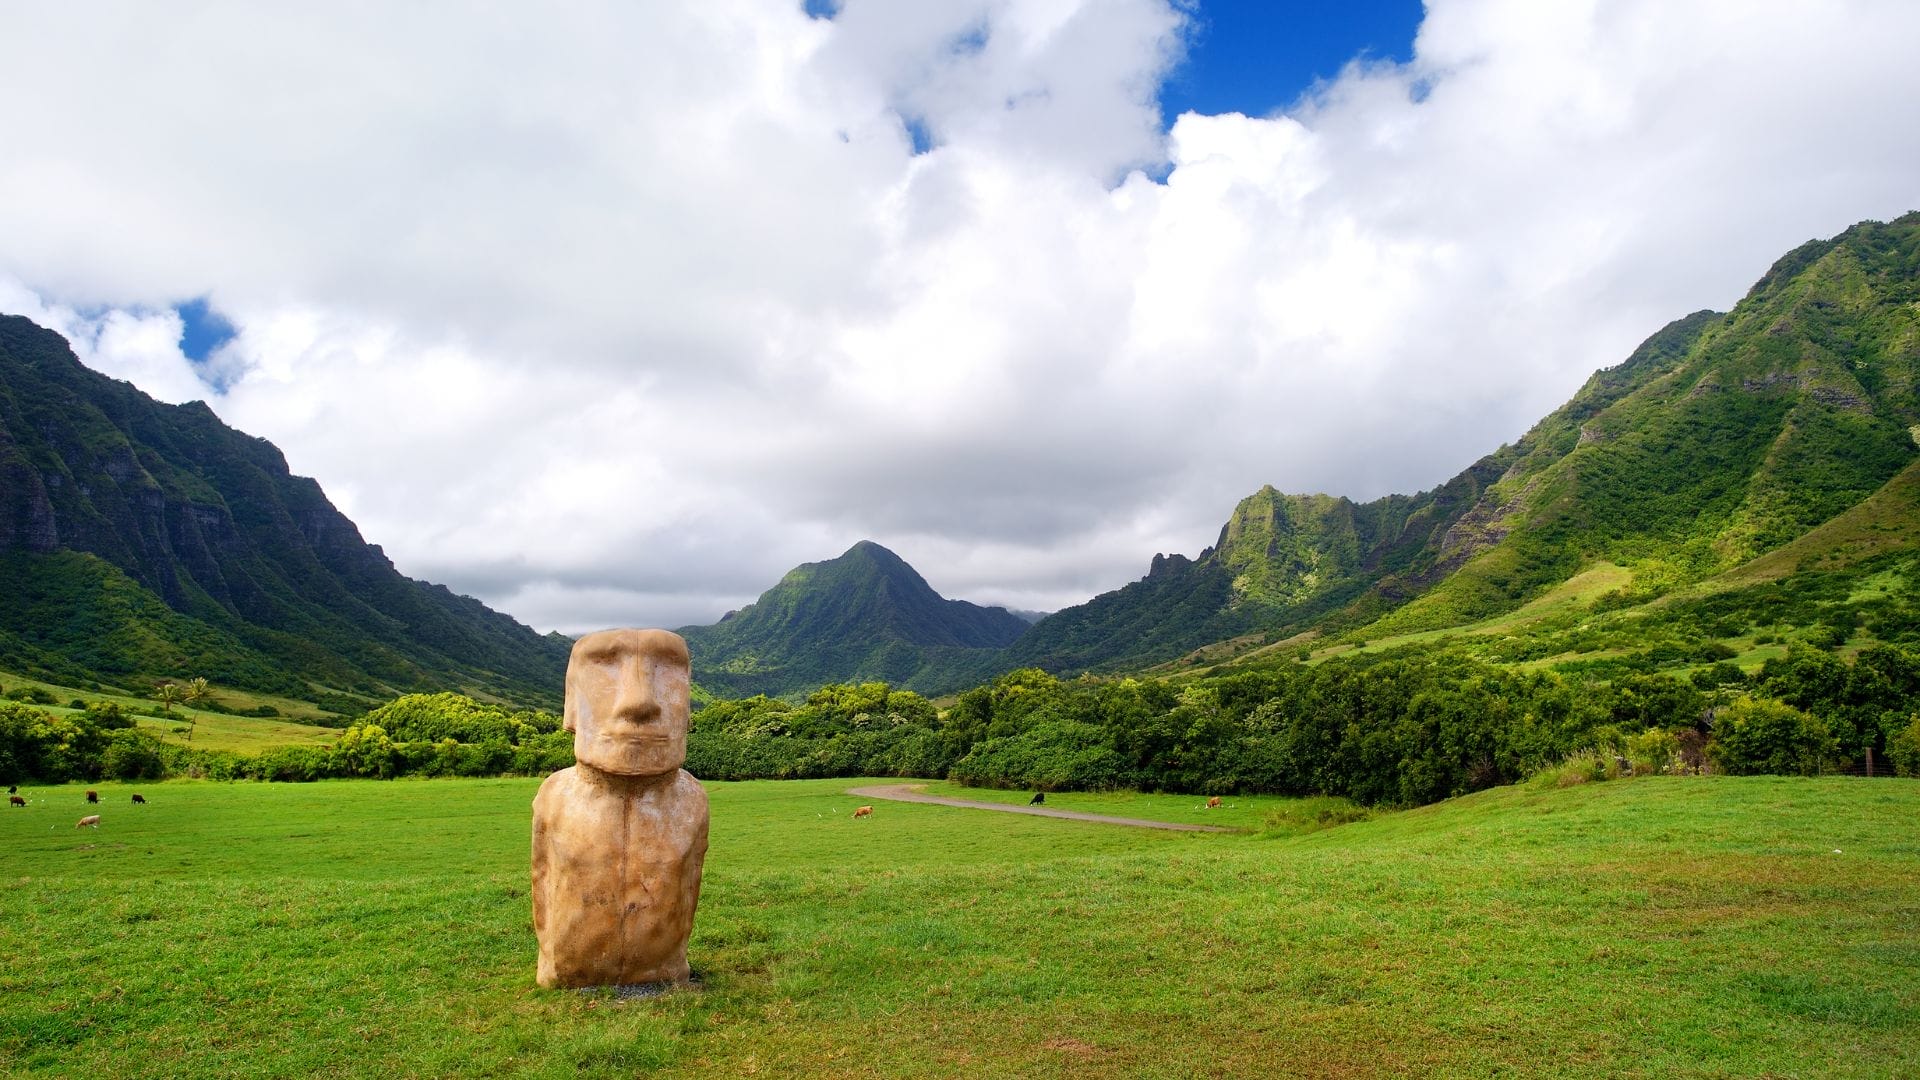 Planning Your Journey Efficiently to go to Kualoa Ranch